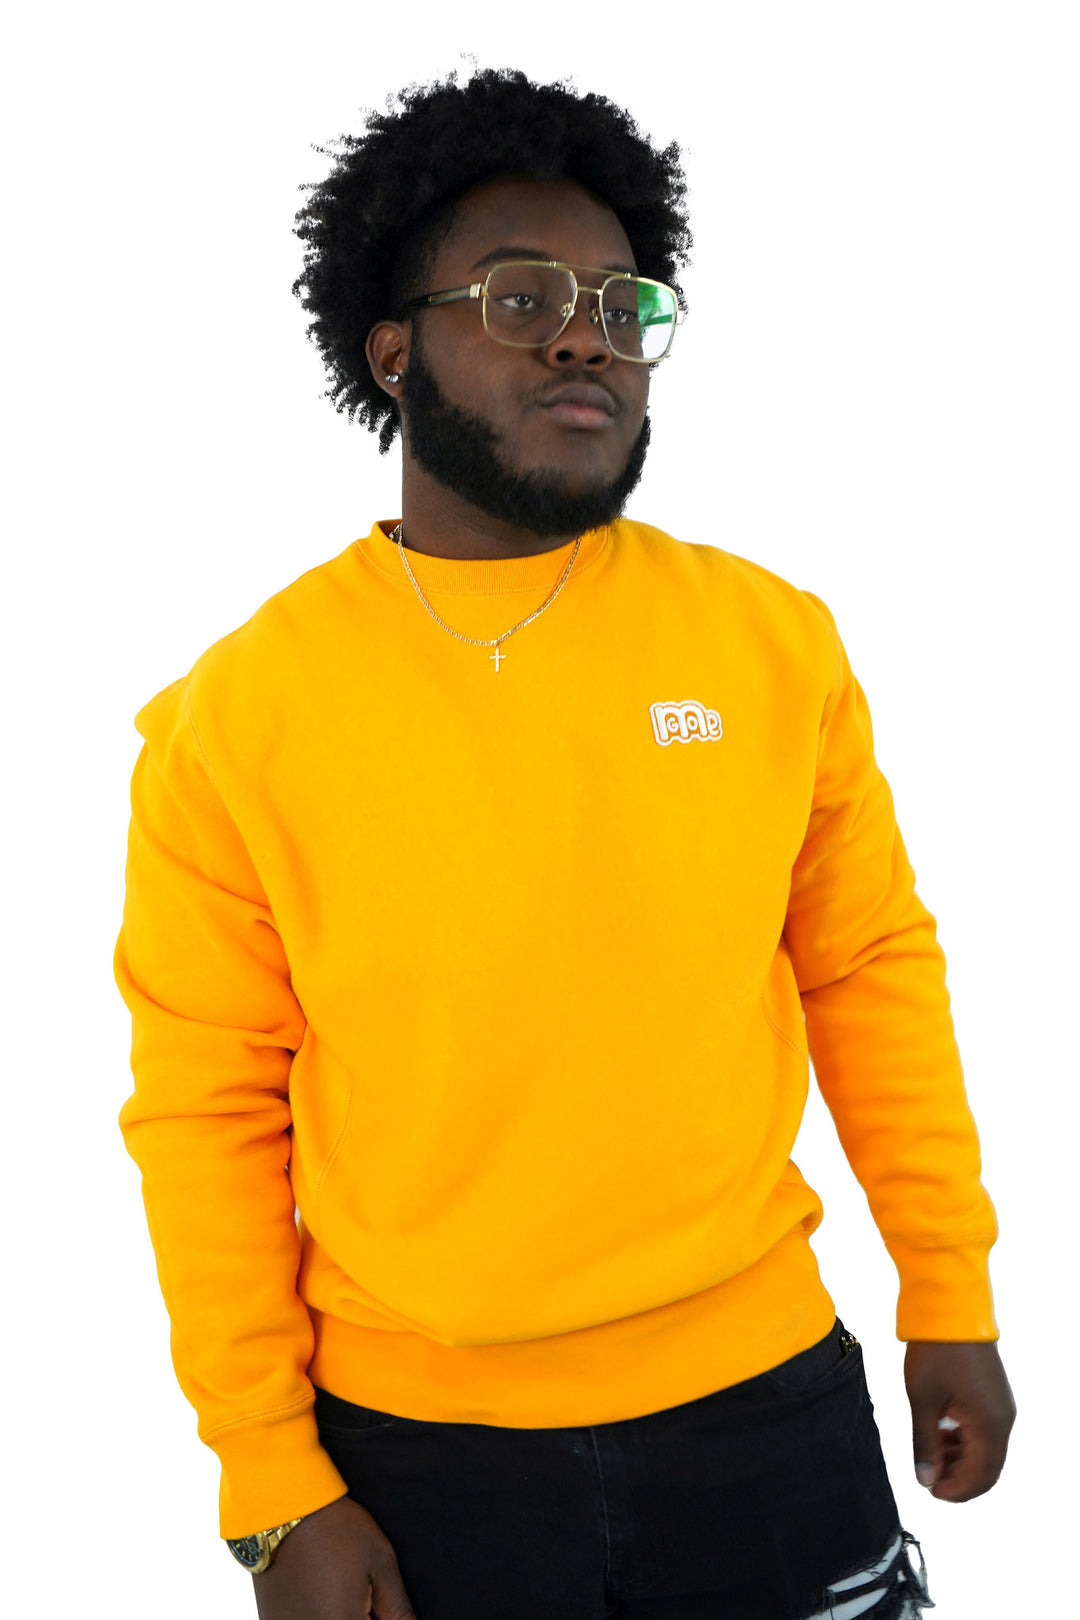 Luxury Gold Crewneck with premium cross grain design to ensure long-lasting comfort and wear. Featuring logo at left front and GODinme on the back.